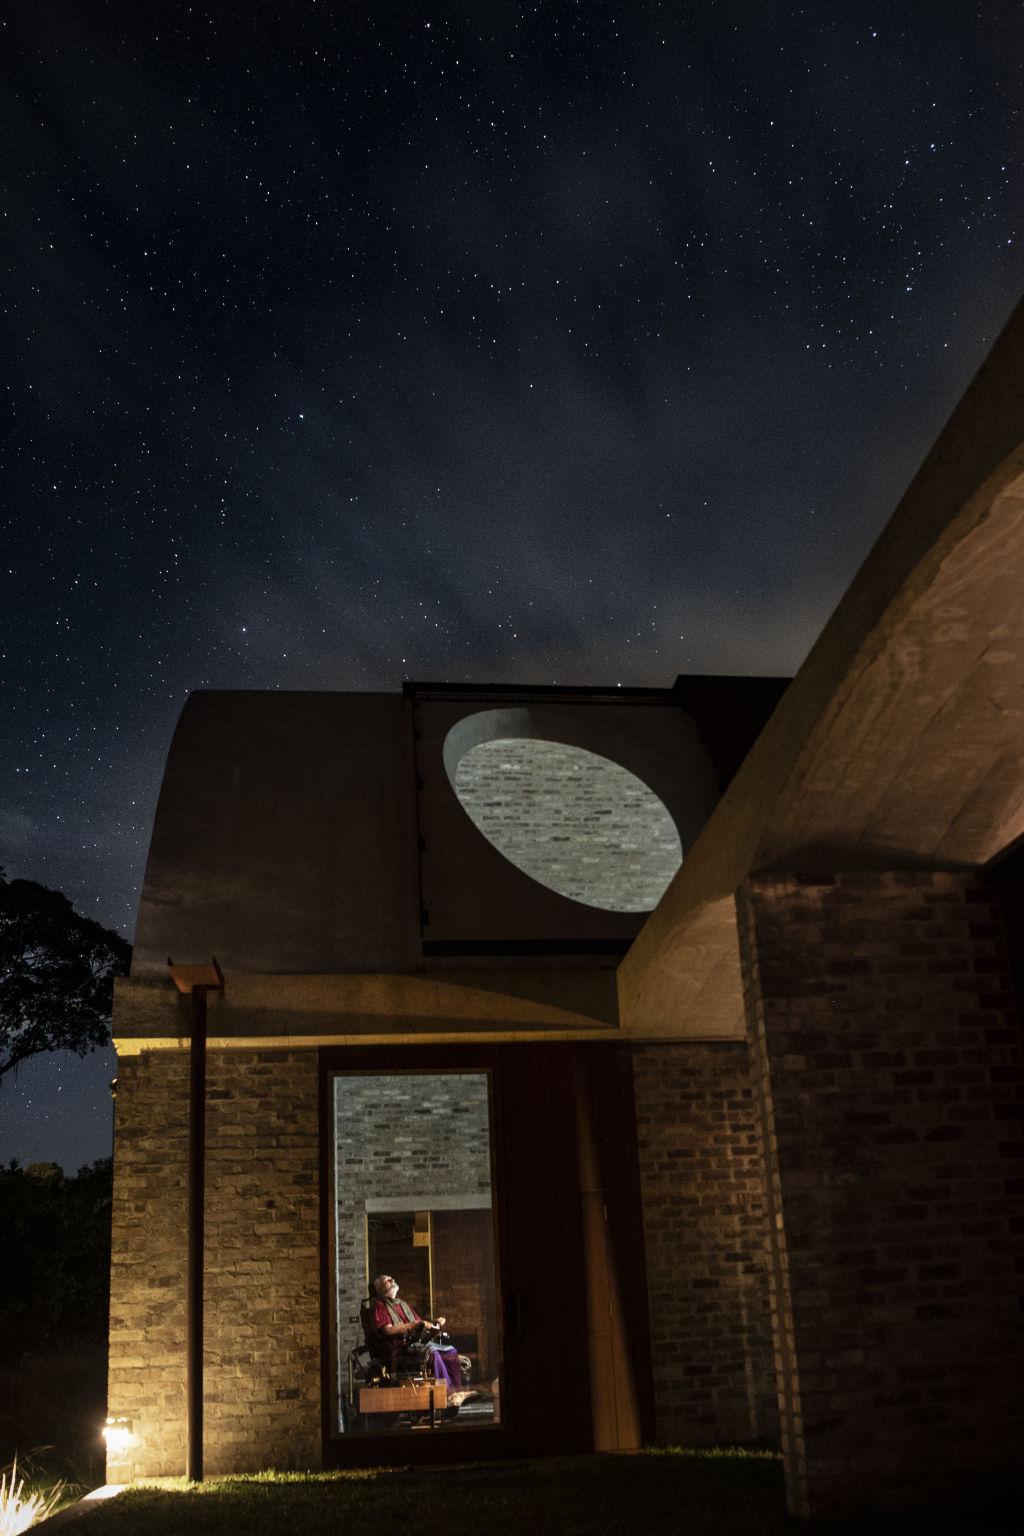 Basil Borun's home has been personally built to accommodate his mobility needs whilst also allowing him to observe the stars comfortably. Photo: Wolter Peeters